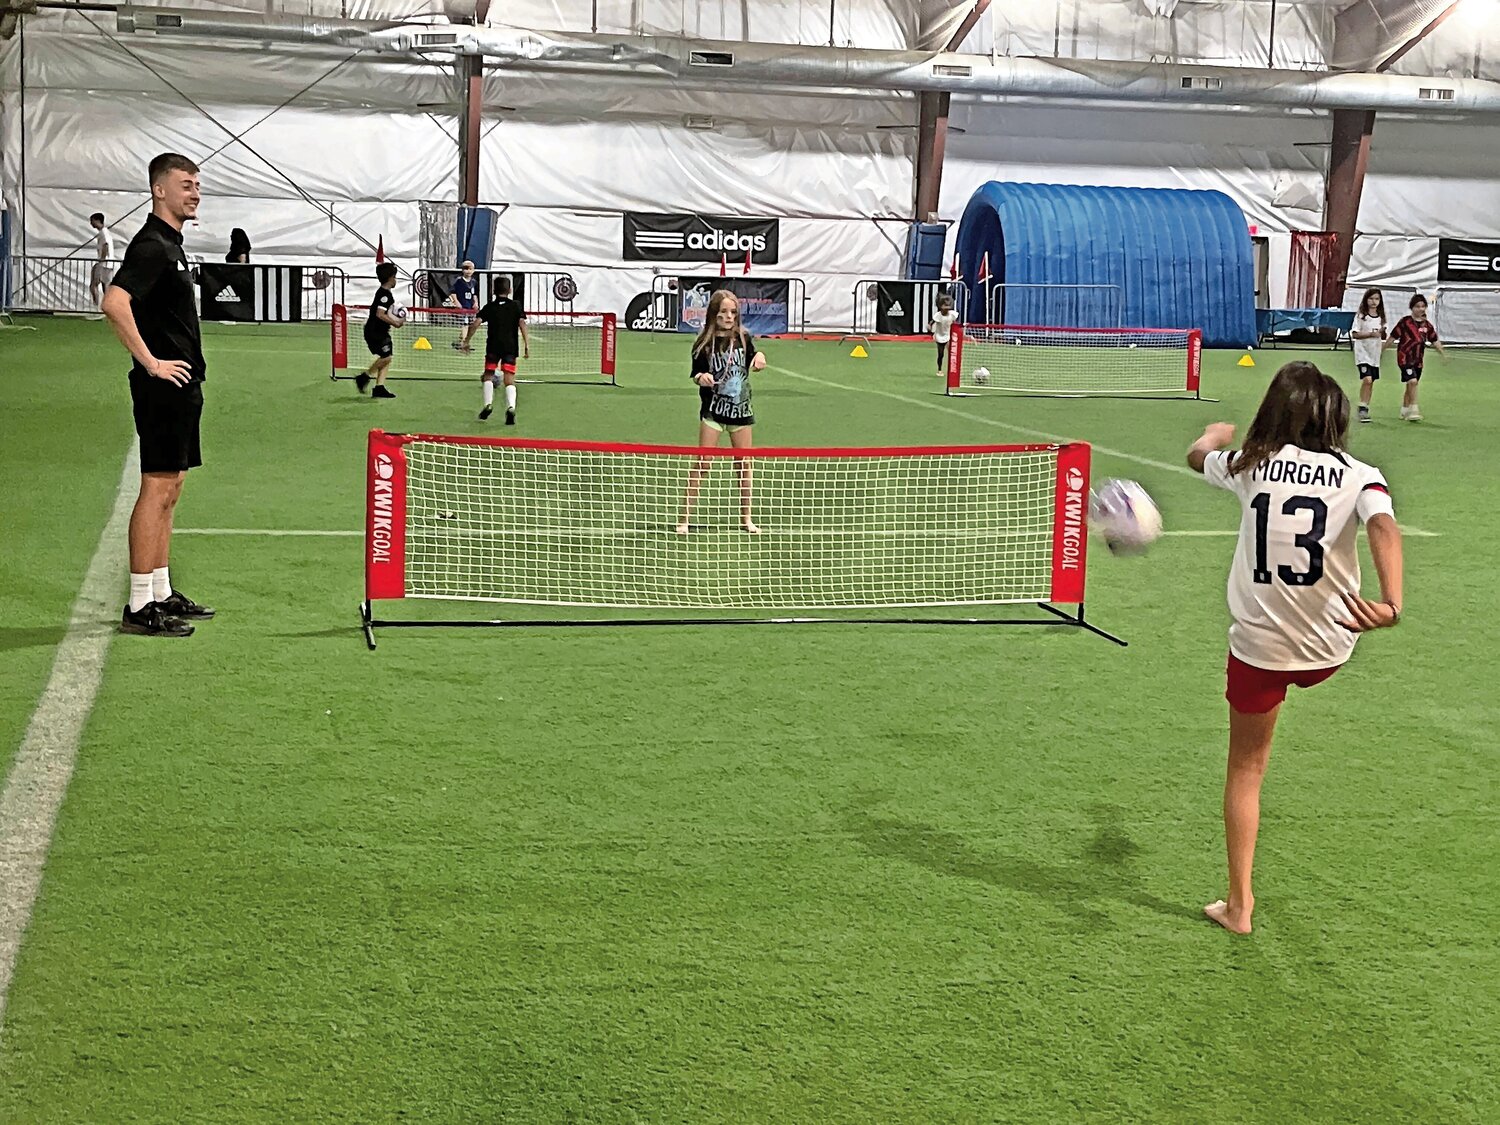 The World Cup game might be on television, but that didn’t stop children from playing soccer-tennis on one half of the field at the Globall Sports Center.